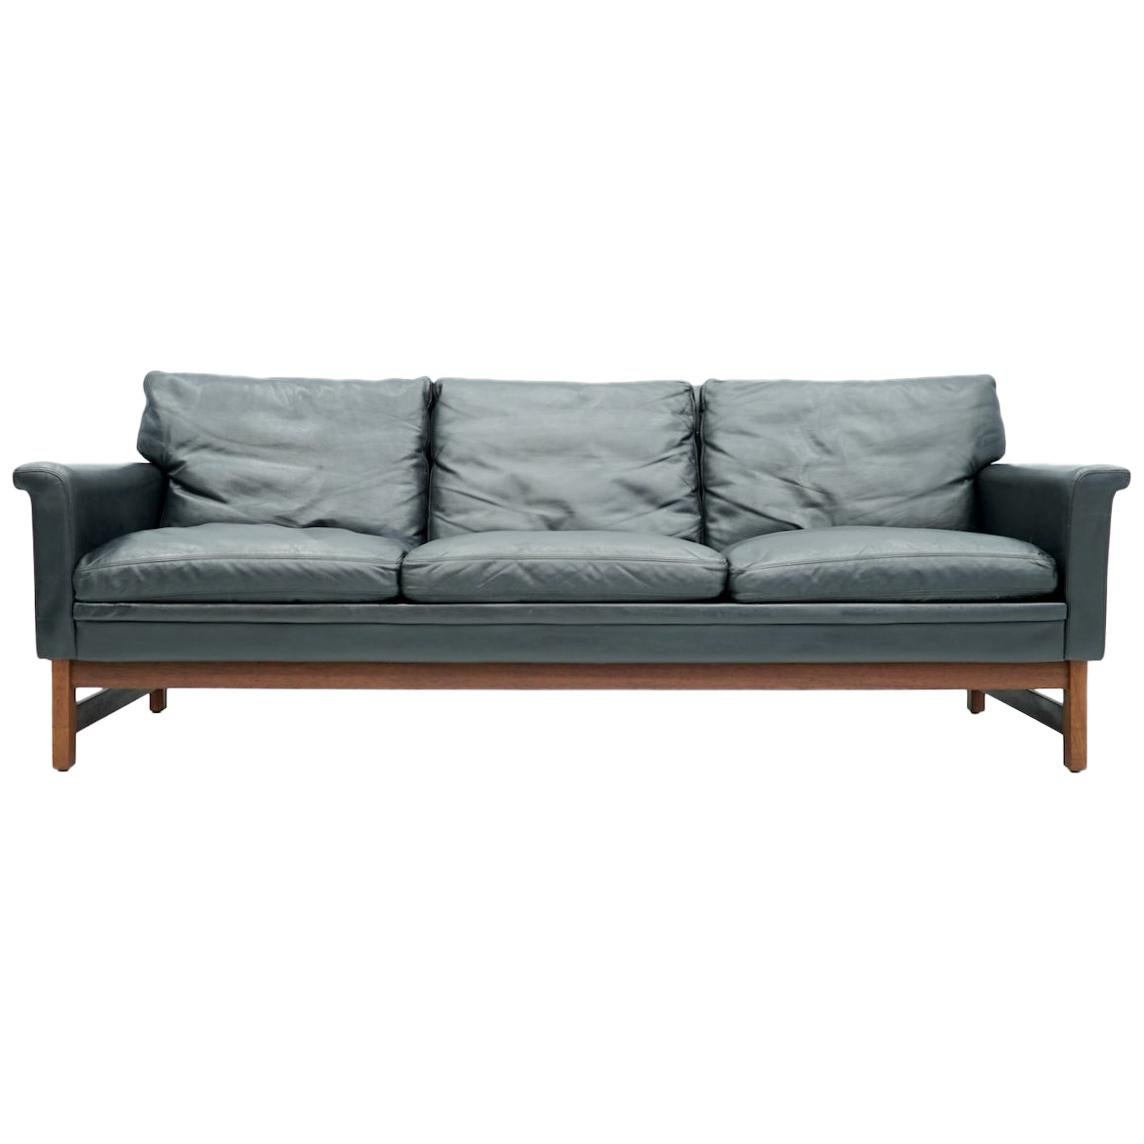 Scandinavian Three-Seat Sofa in Teak Wood and Black Leather, 1960s For Sale